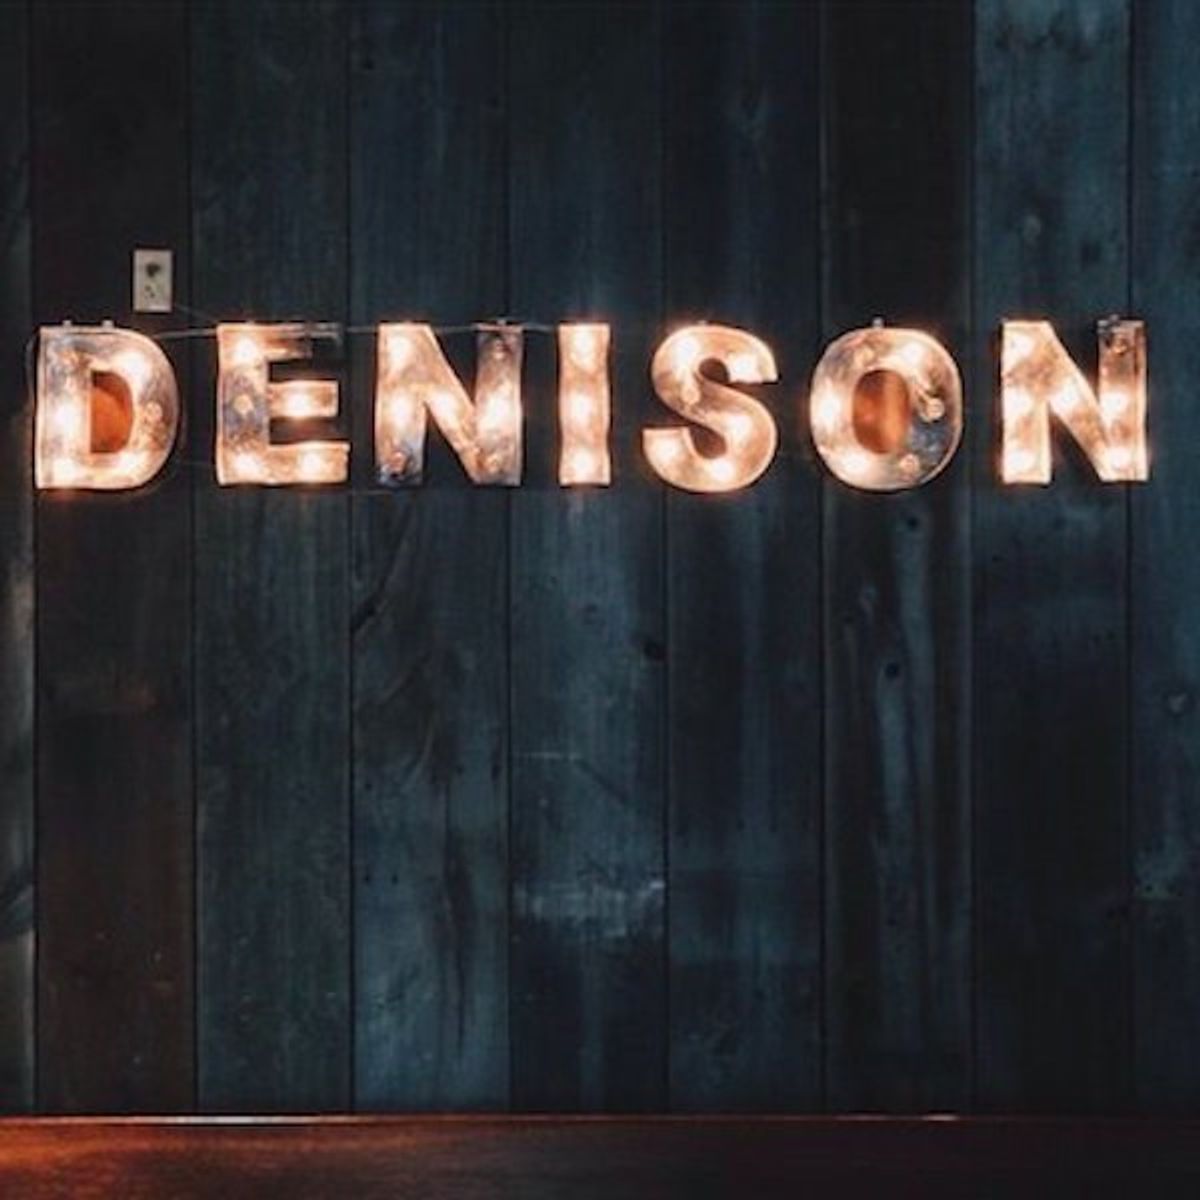 Not Another Love Letter to Denison